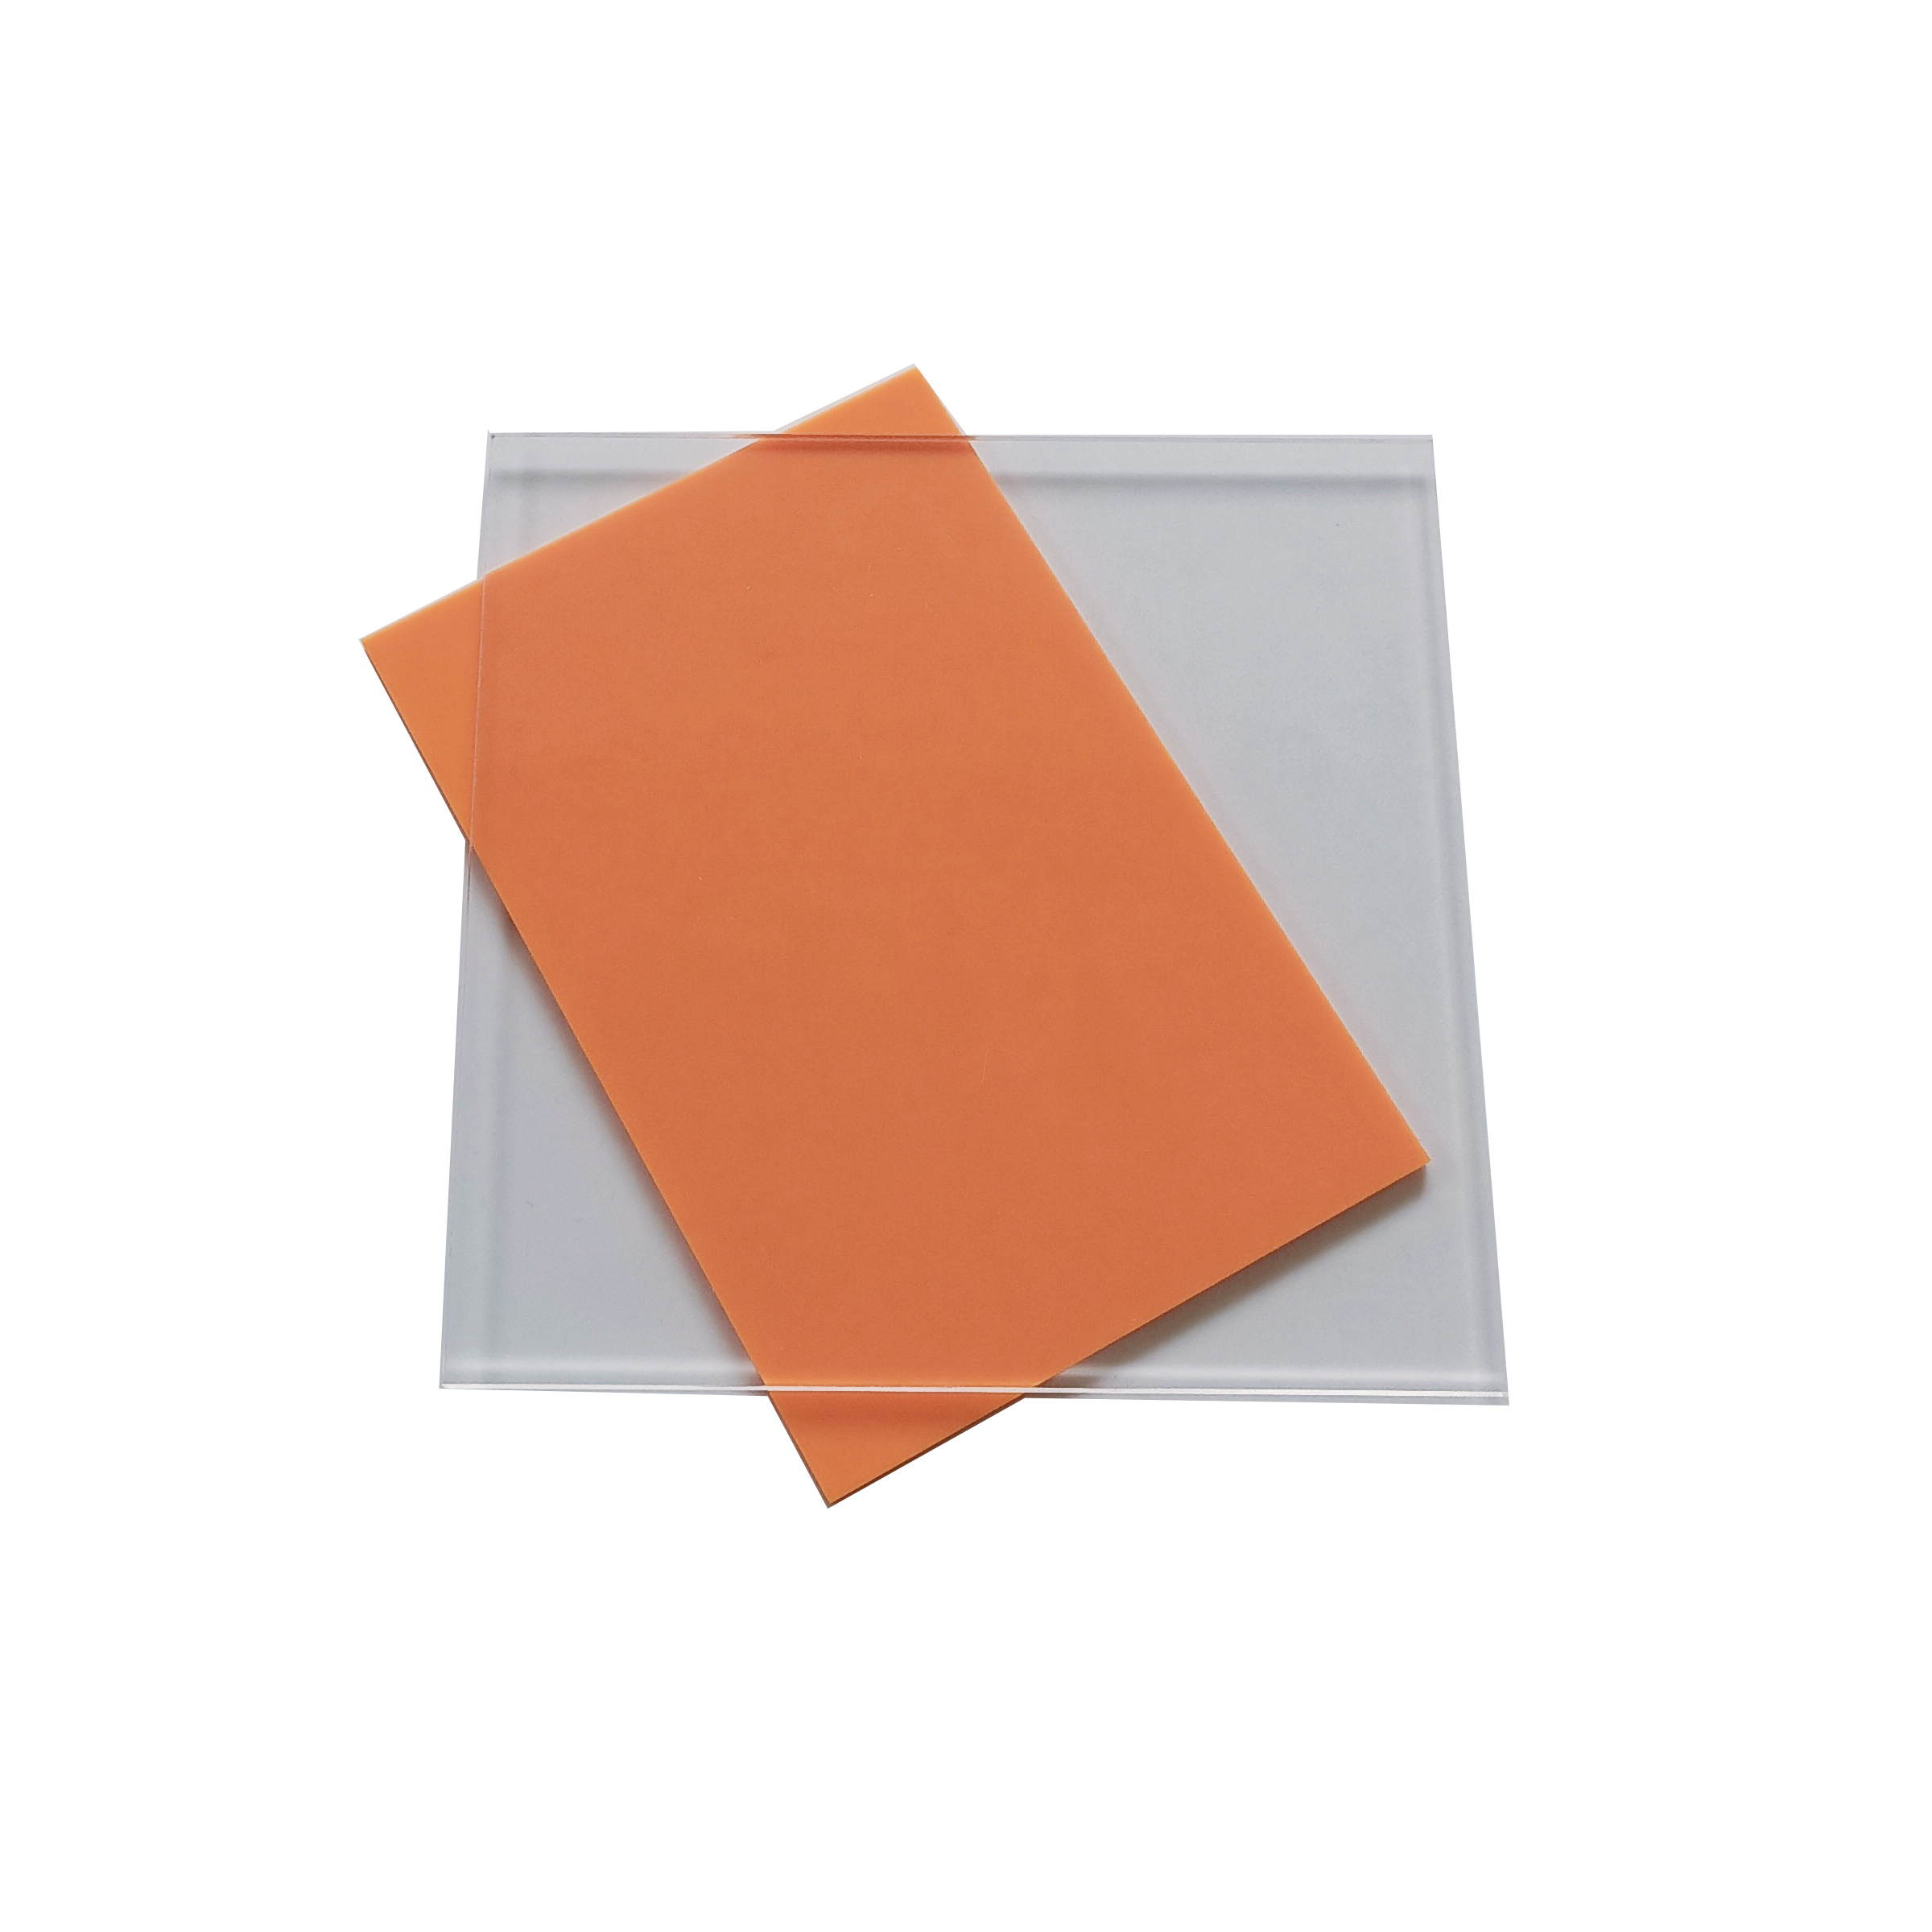 Acrylic Sheets 4x8 Acrylic Sheets A5 Size Acrylic Sheets for Laser Cutting